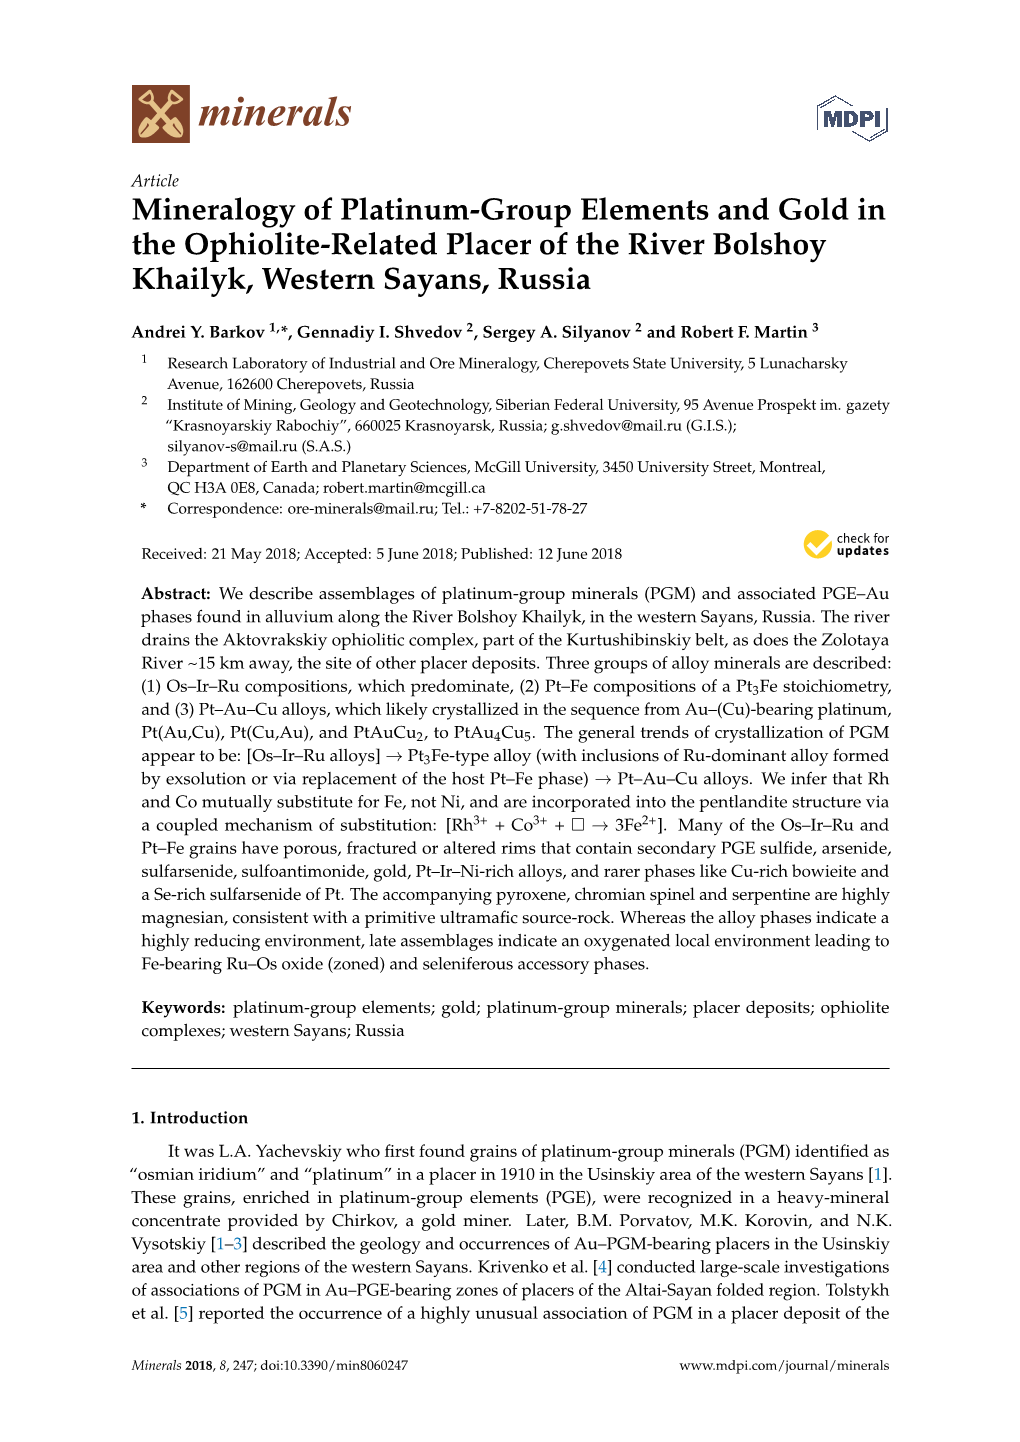 Mineralogy of Platinum-Group Elements and Gold in the Ophiolite-Related Placer of the River Bolshoy Khailyk, Western Sayans, Russia